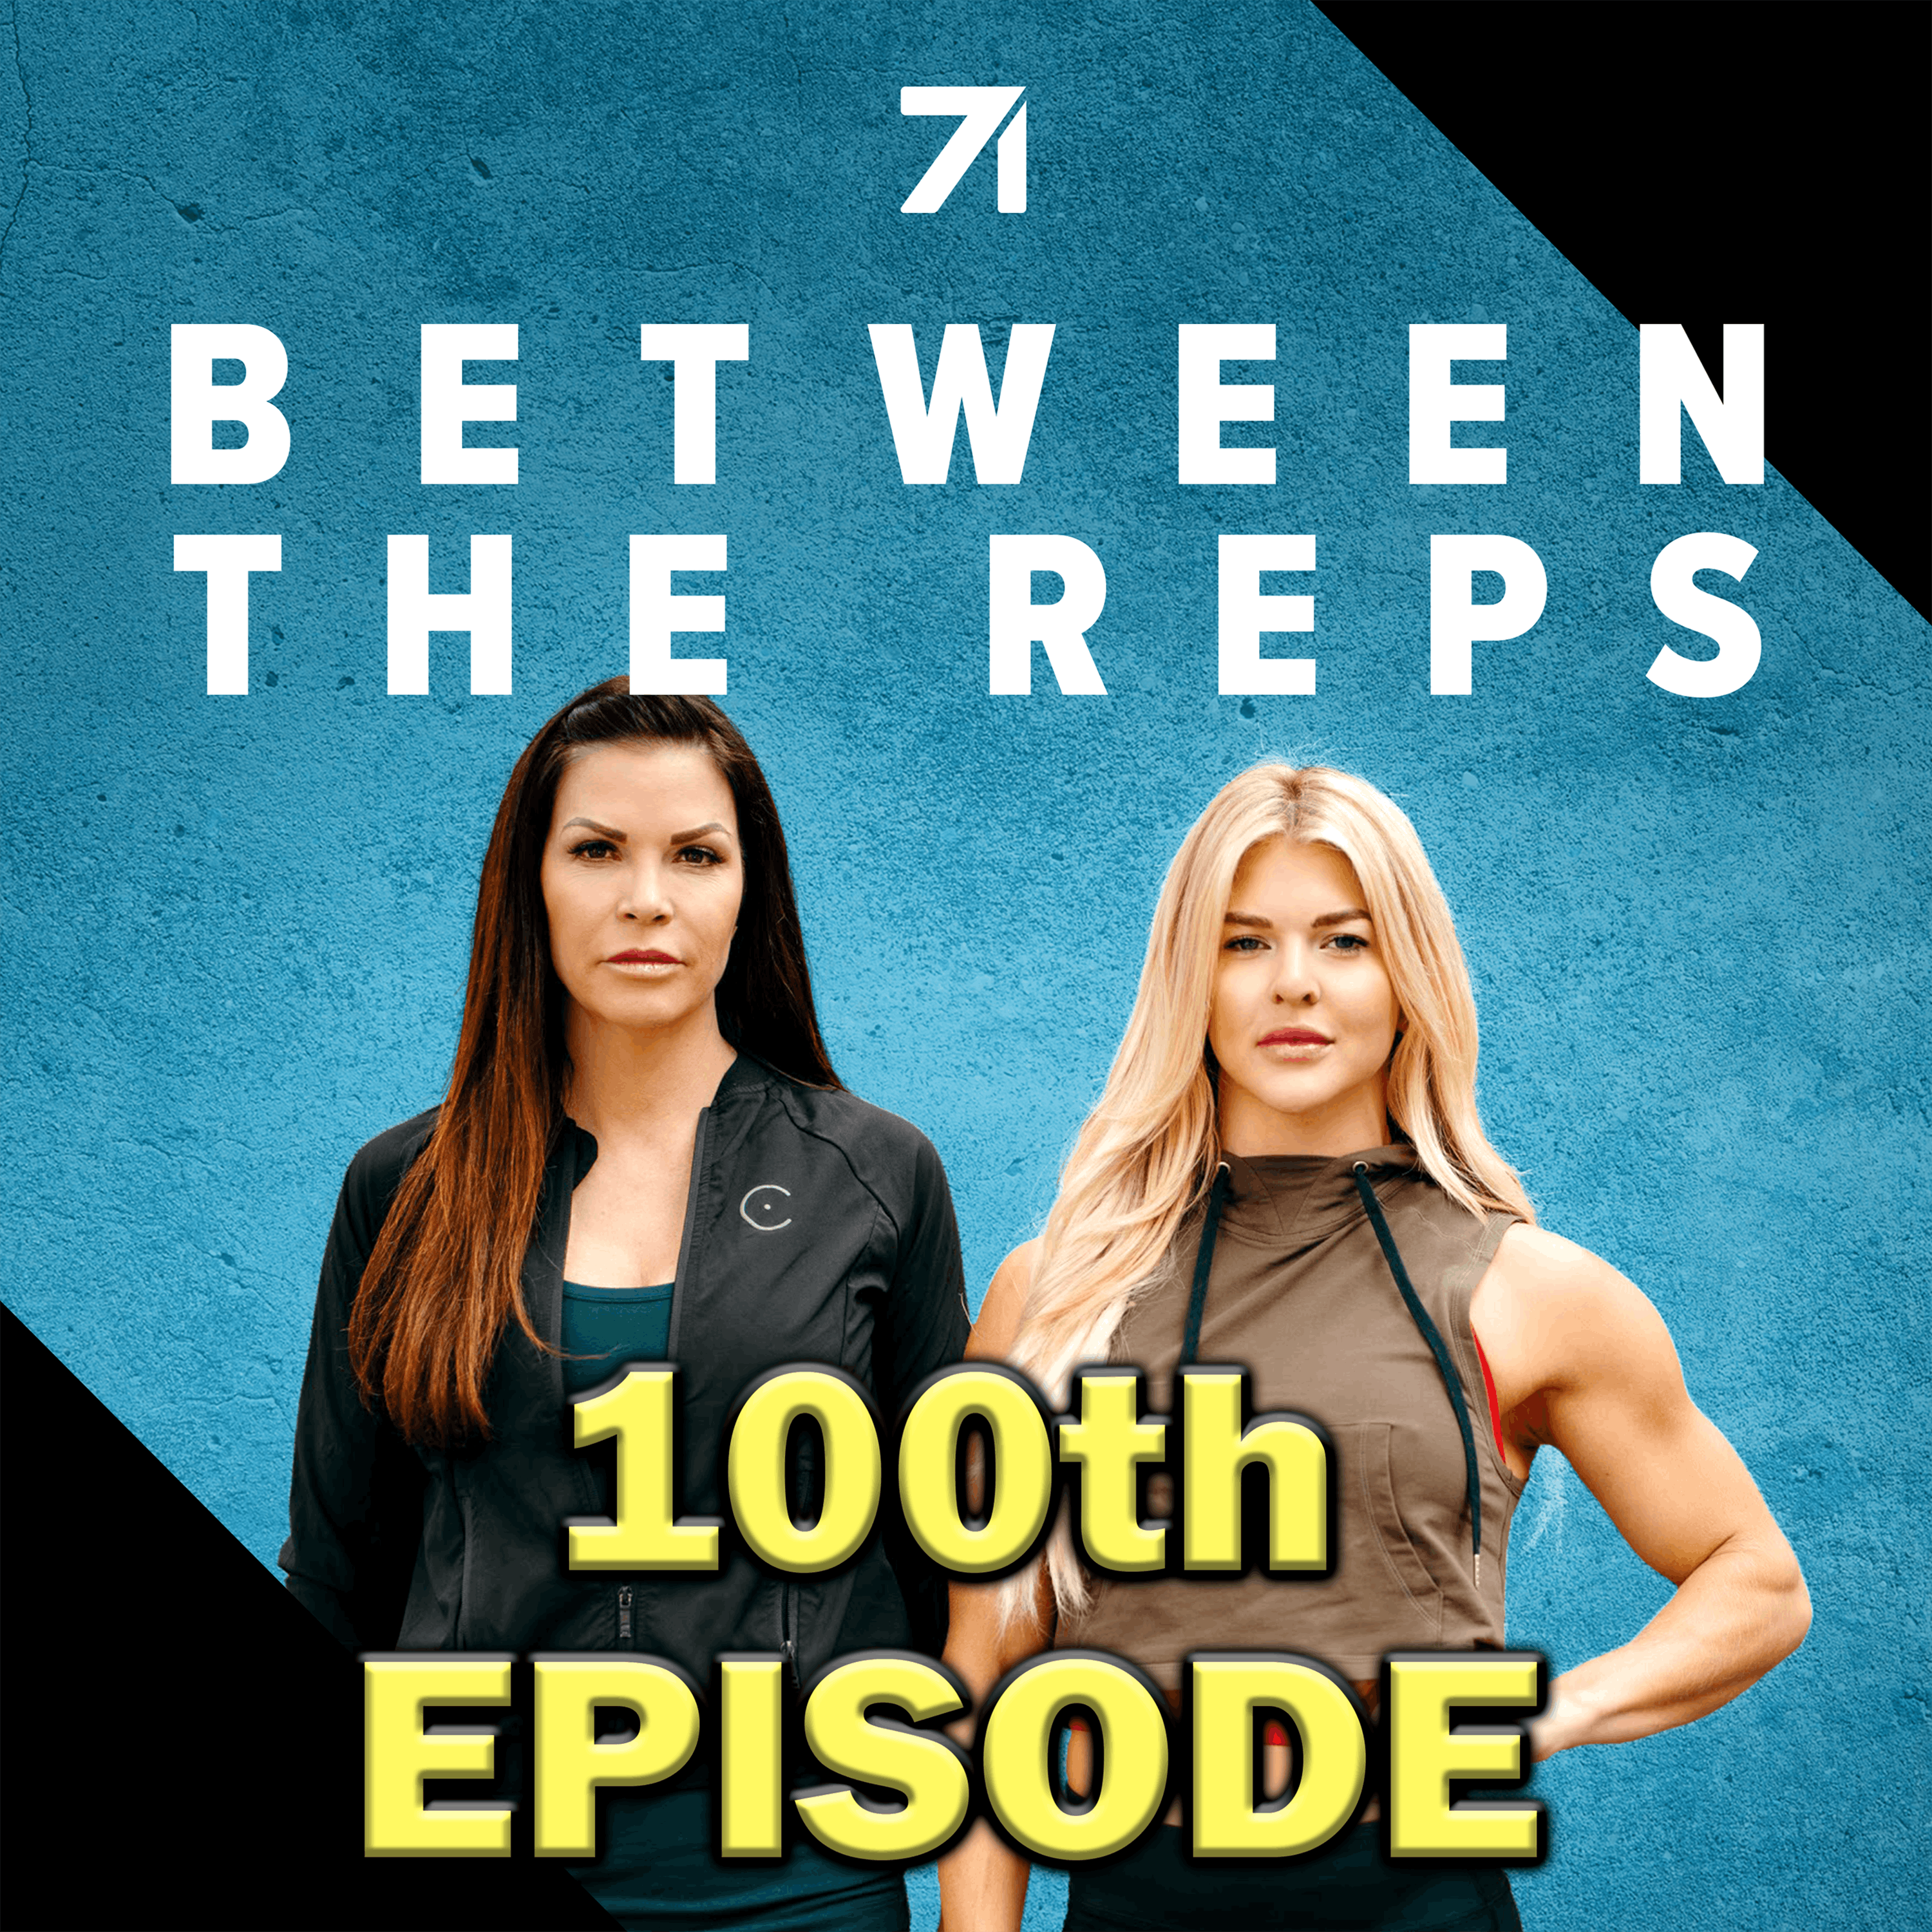 Our 100th Episode ft. Brooke’s Mom!